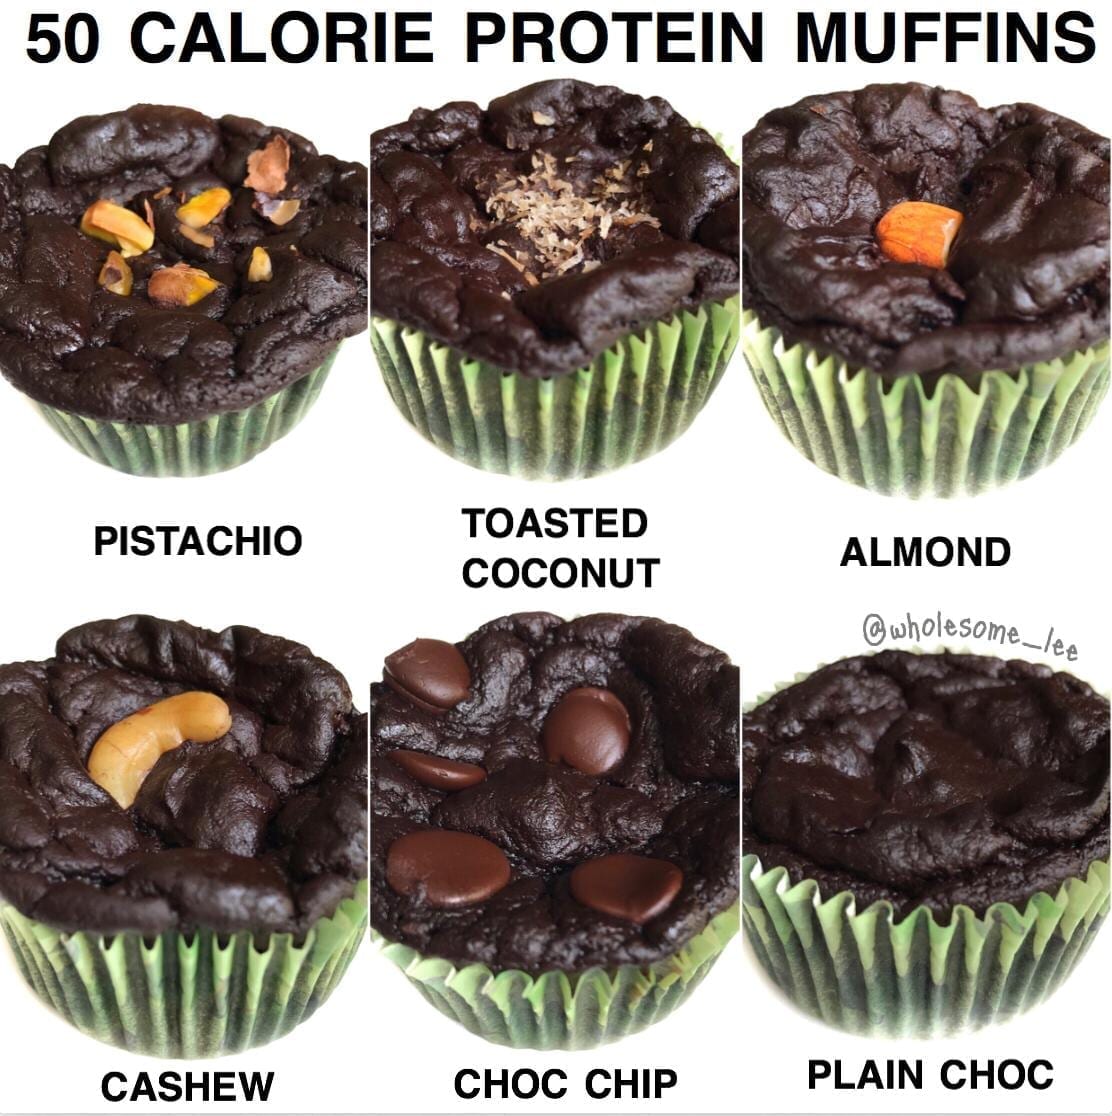 50 Calorie Protein Muffins